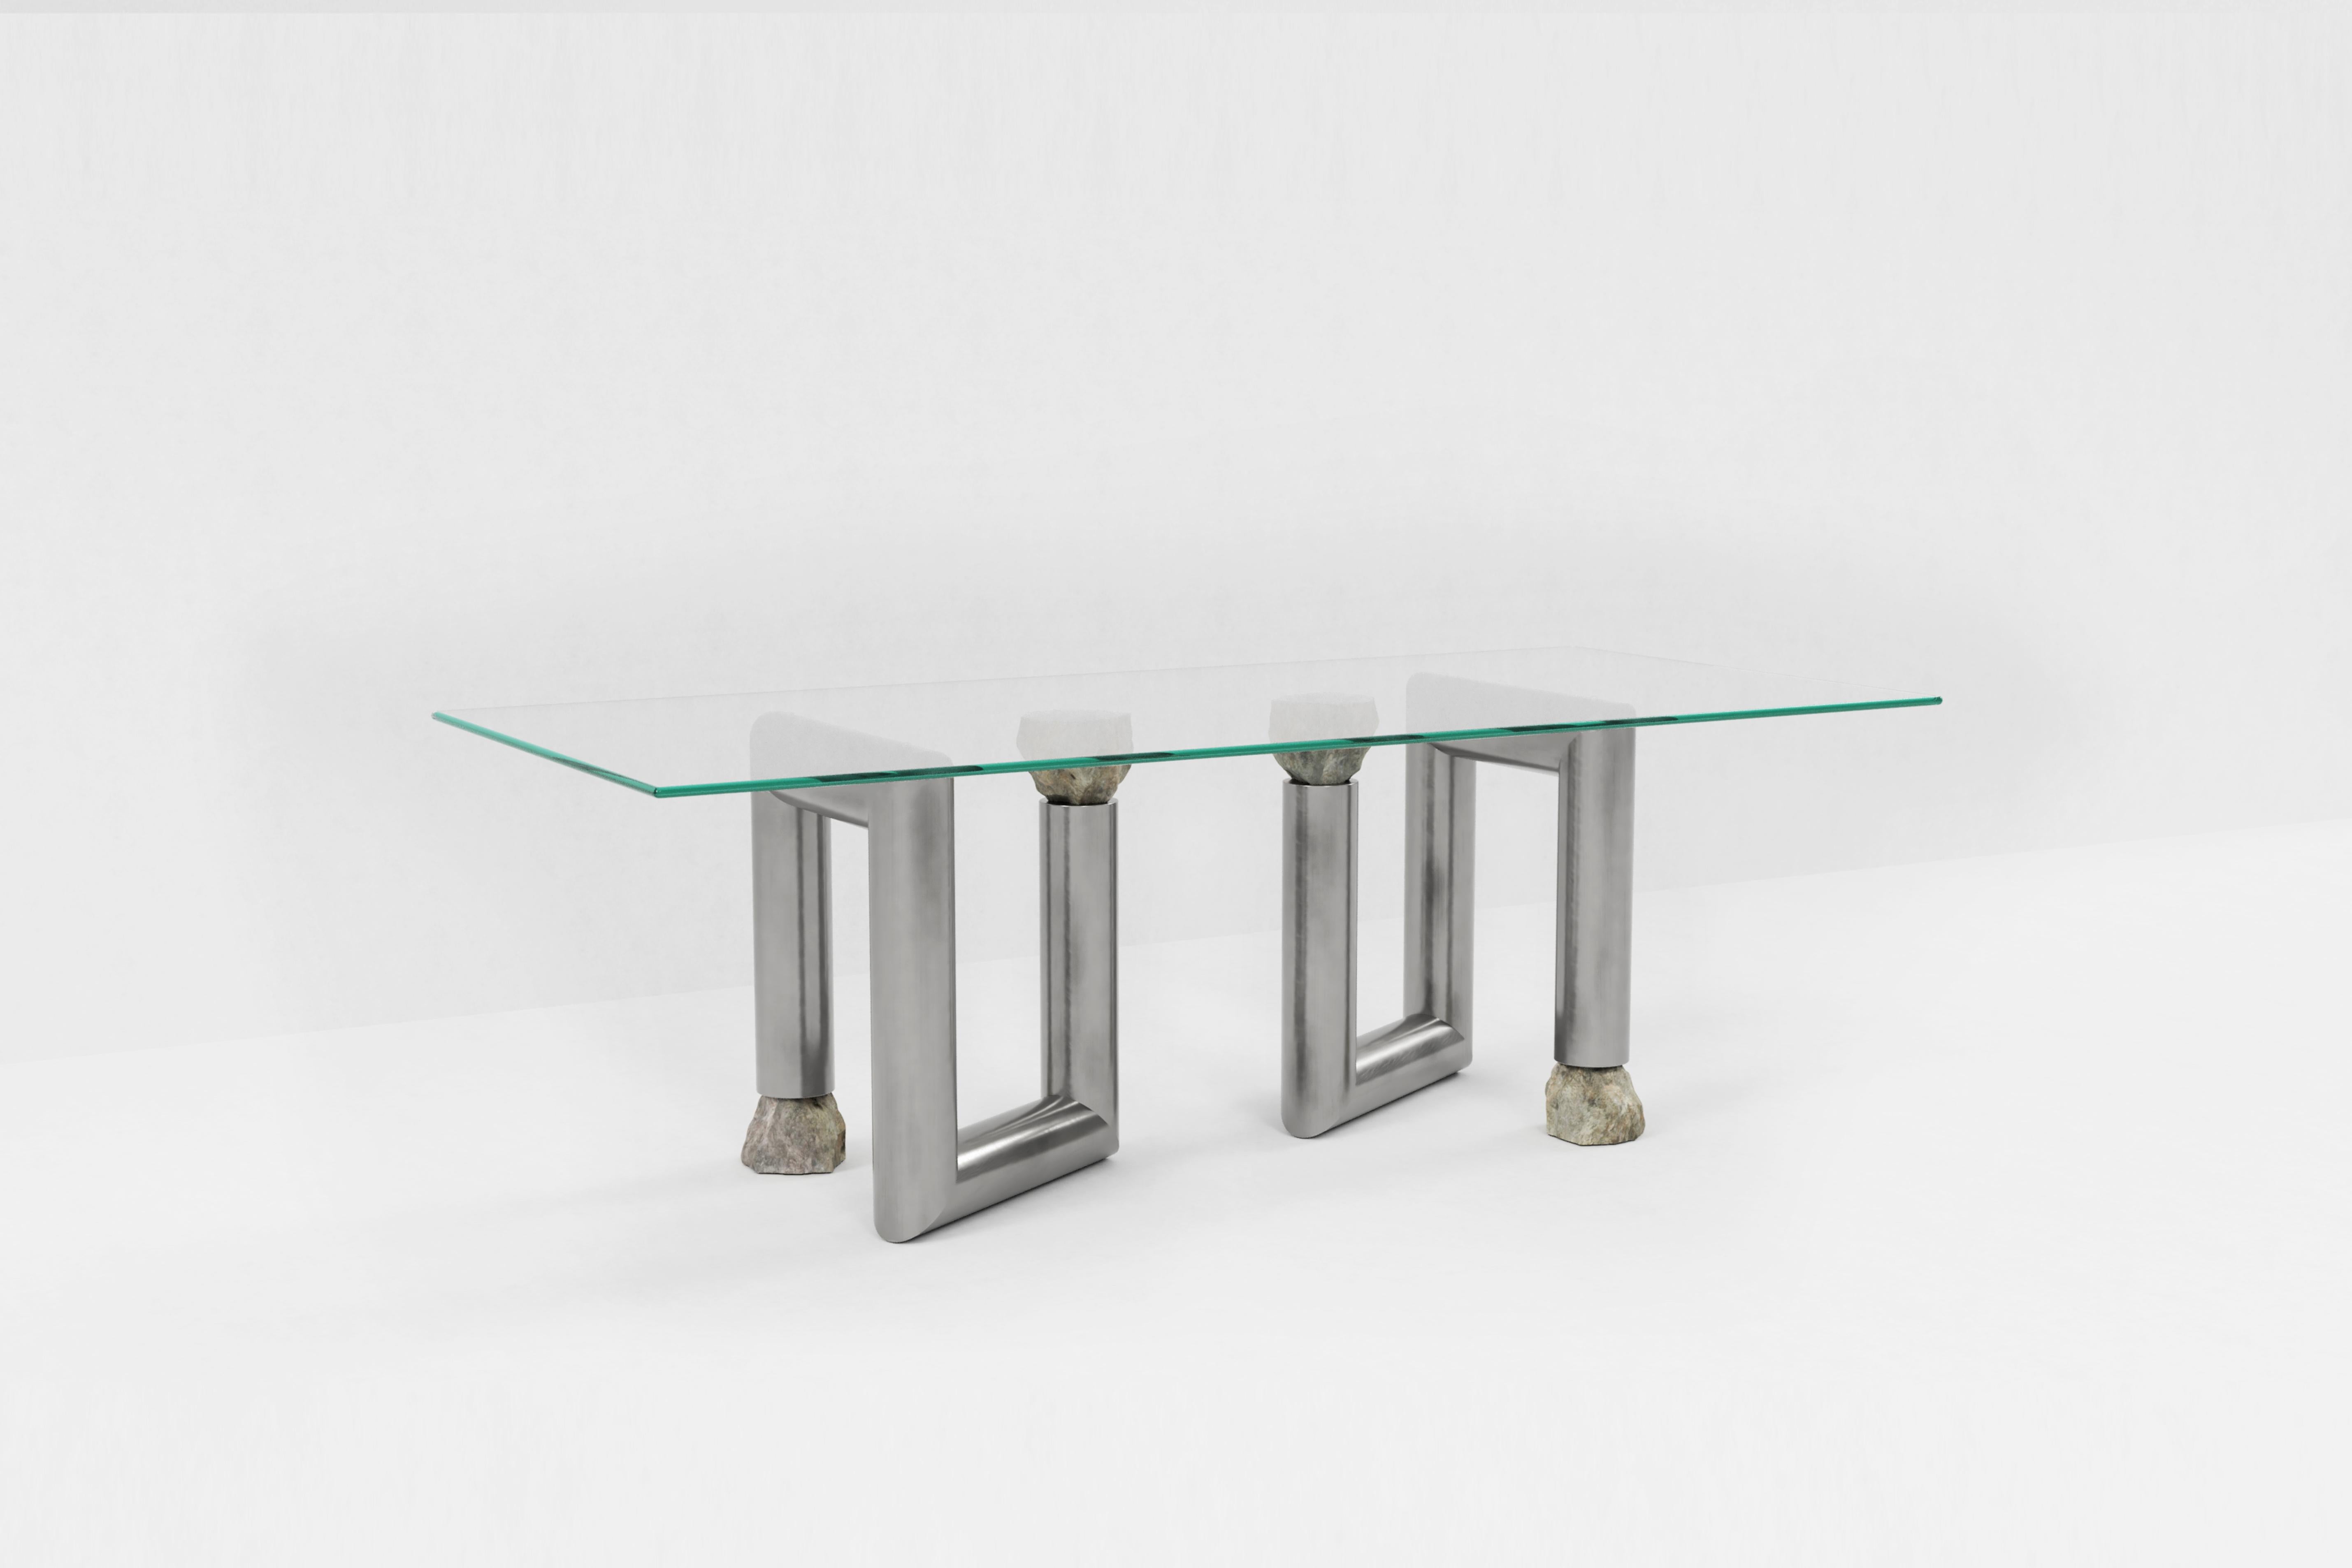 Stainless steel dining table by Batten and Kamp
Limited edition of 24 + 3 AP.
Dimensions: D 250 x W 115 x H 73 cm 
Materials: Hand brushed stainless steel, toughed glass, granite stone

The top can be made to the buyer's preference.

Batten and Kamp